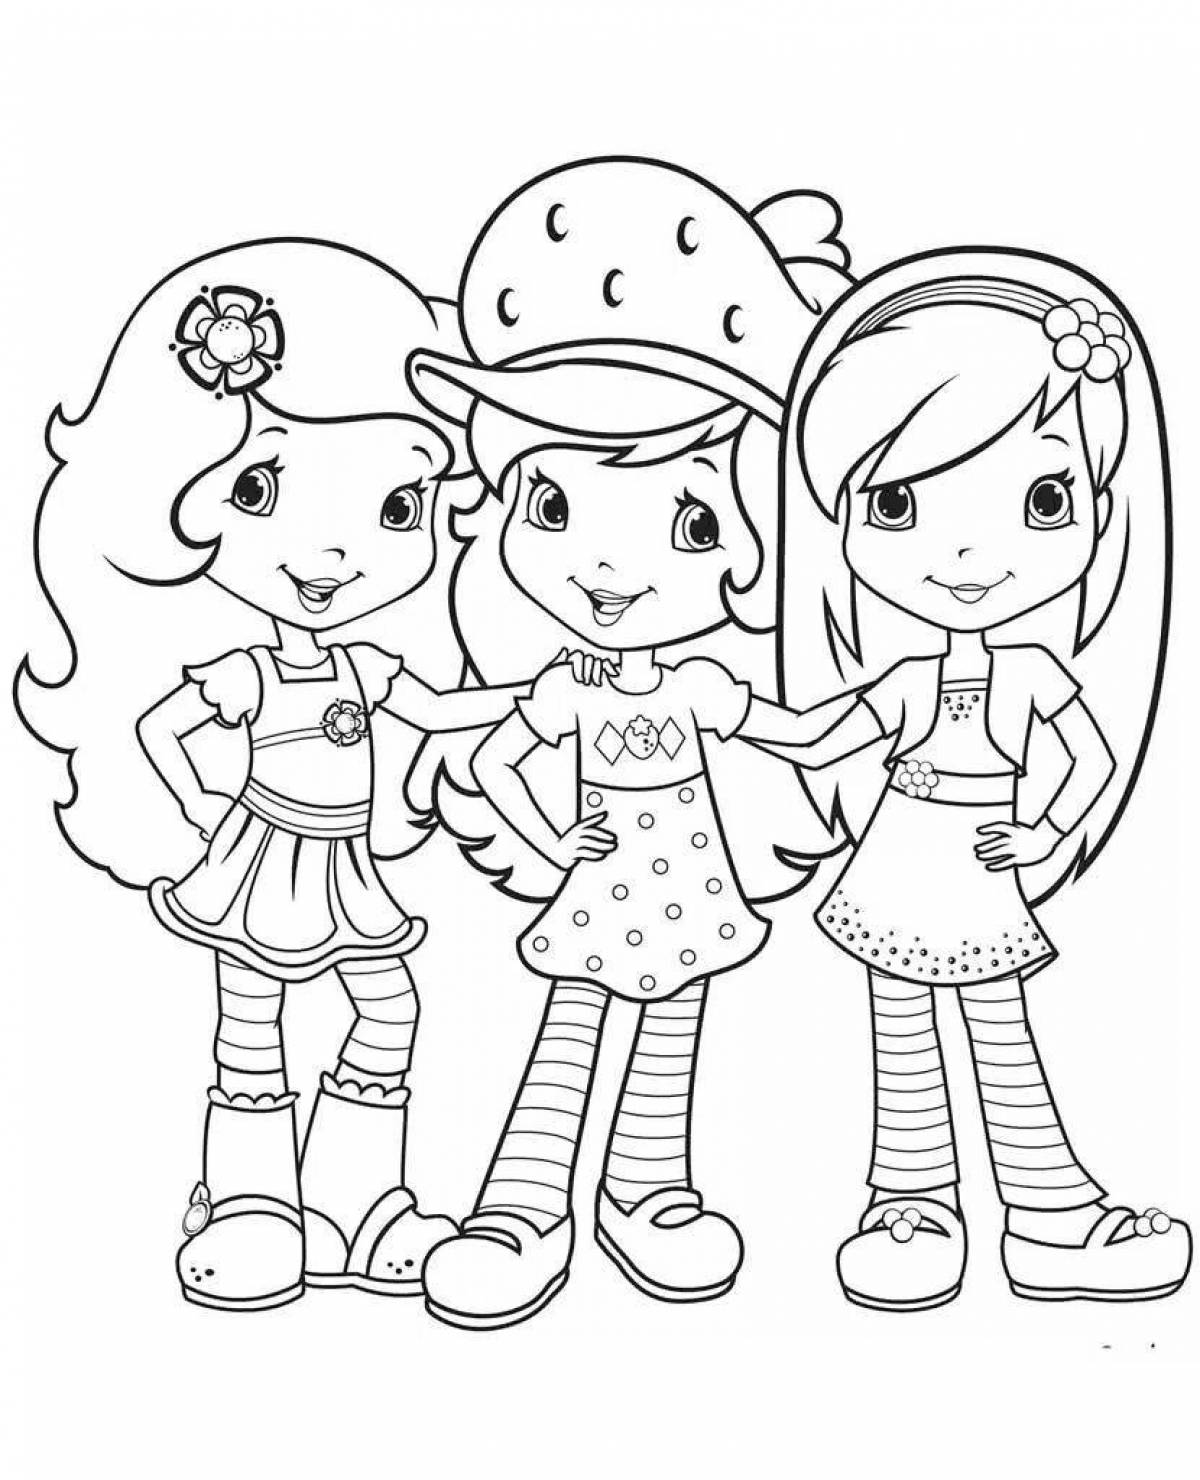 Three girlfriends giggling coloring book